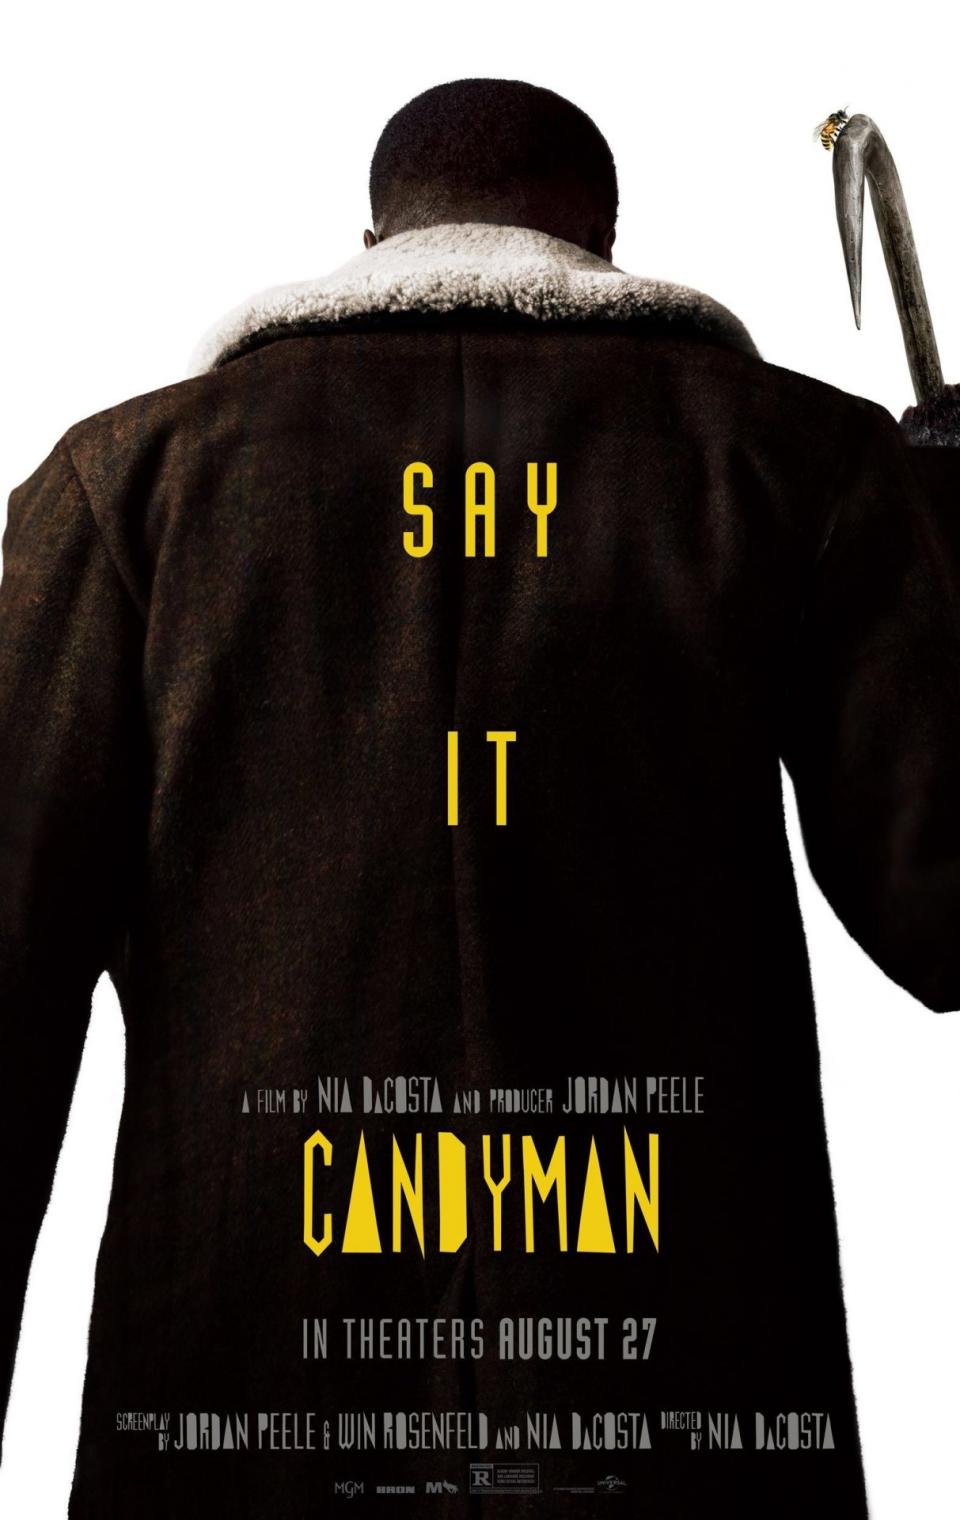 The Poster for Candyman, which shows the silhouette of a man's back with the words "SAY IT."